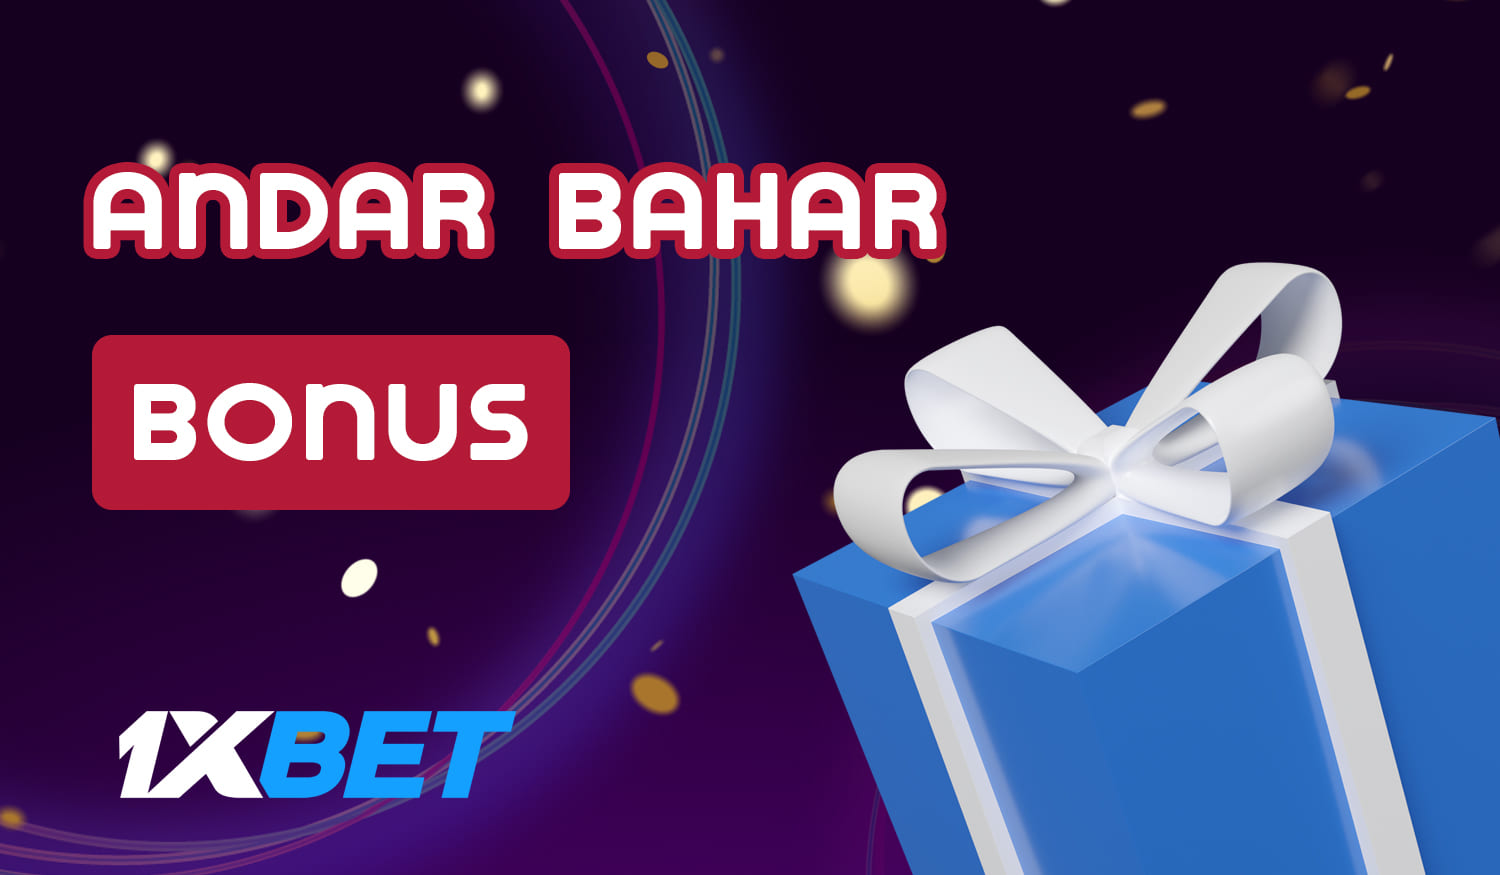 Bonuses available to all 1xBet India users when playing Andar Bahar